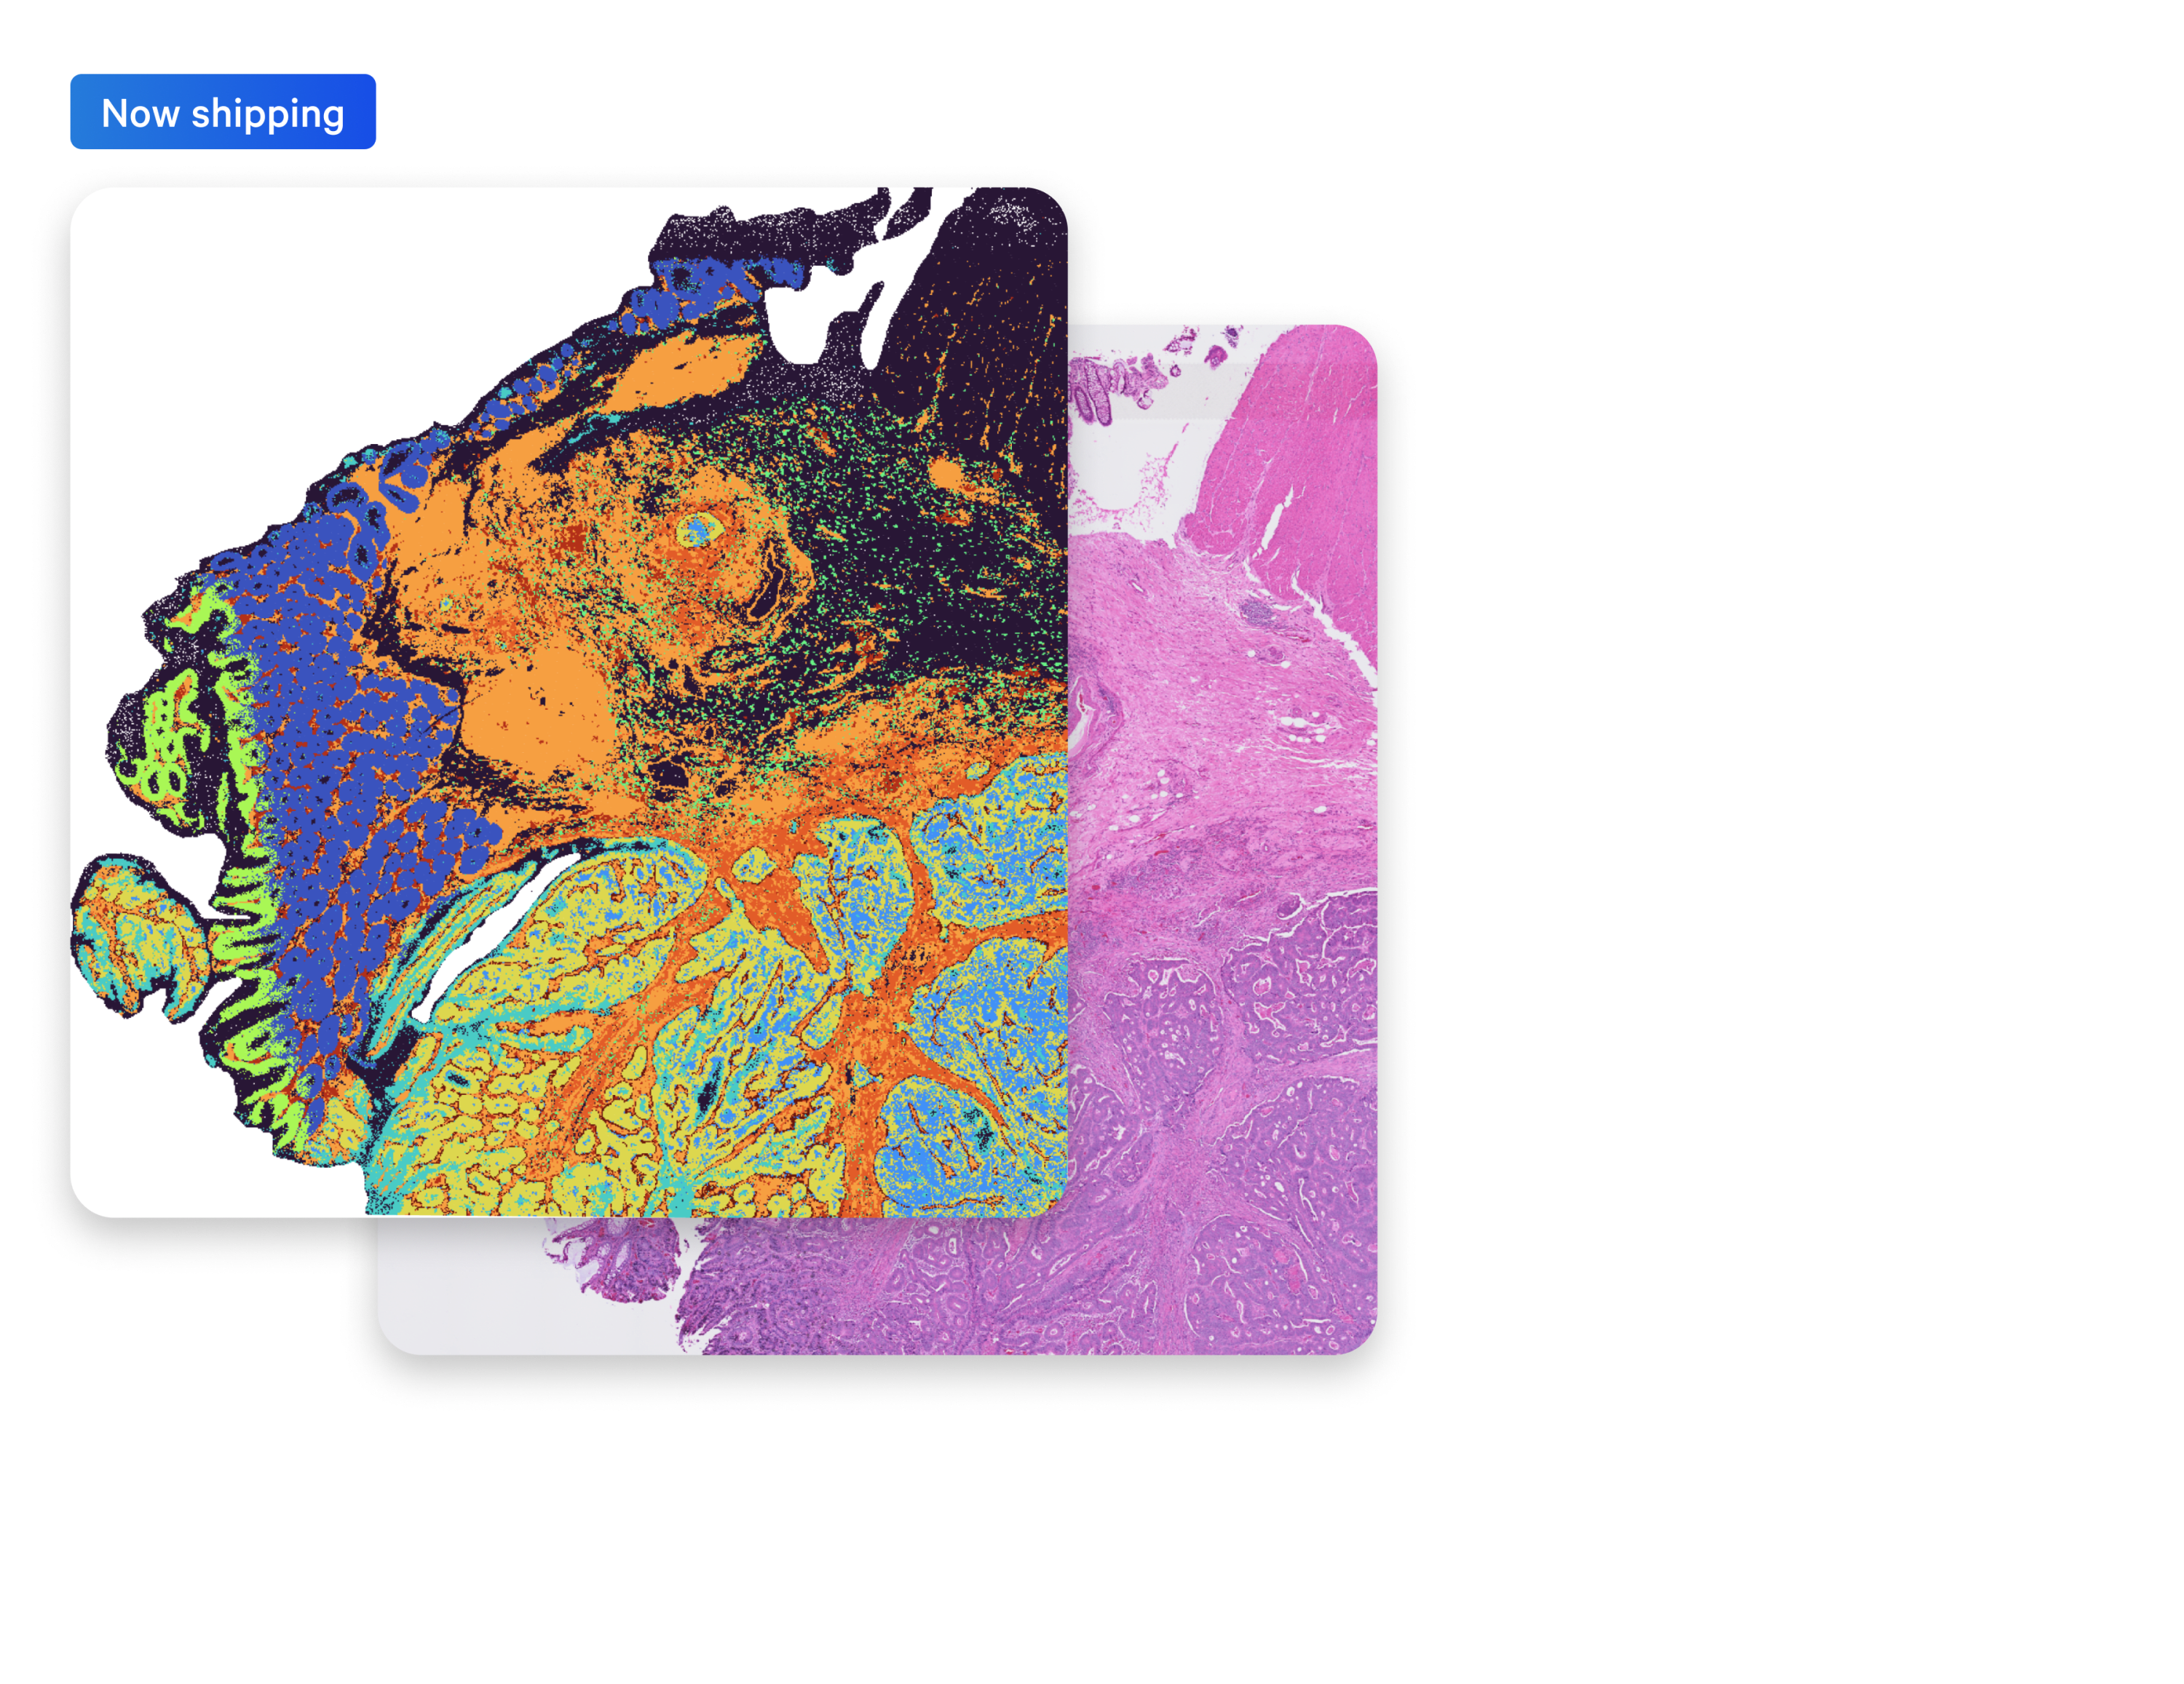 Overlay of Visium HD data and H&E image from the same tissue section